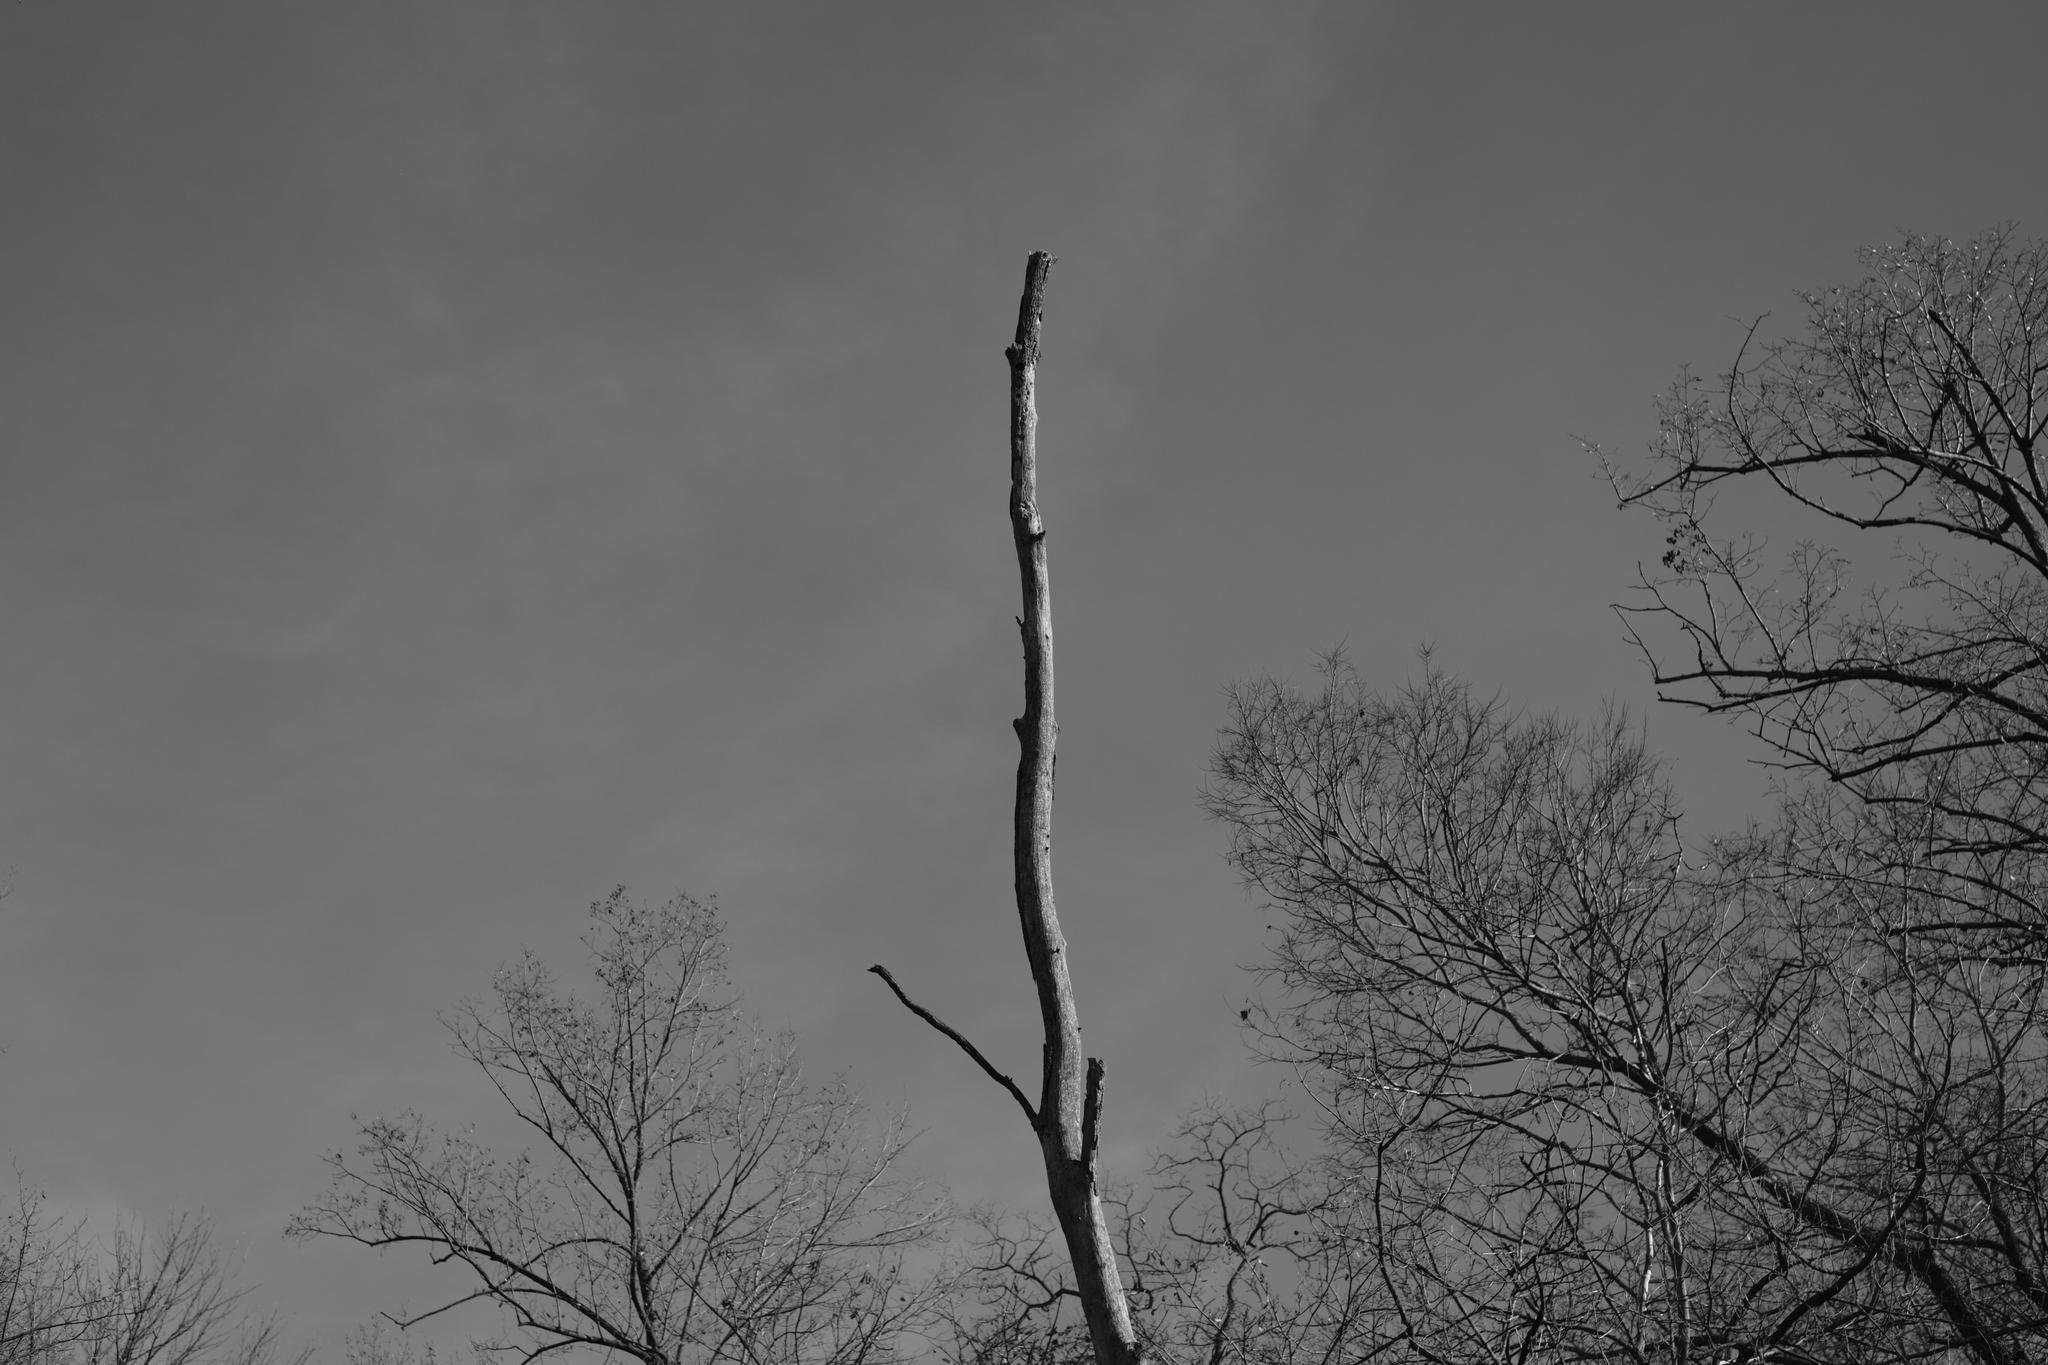 A black and white photograph of a tall, leafless tree branch extending upwards against a cloudy sky, with other bare tree branches surrounding it